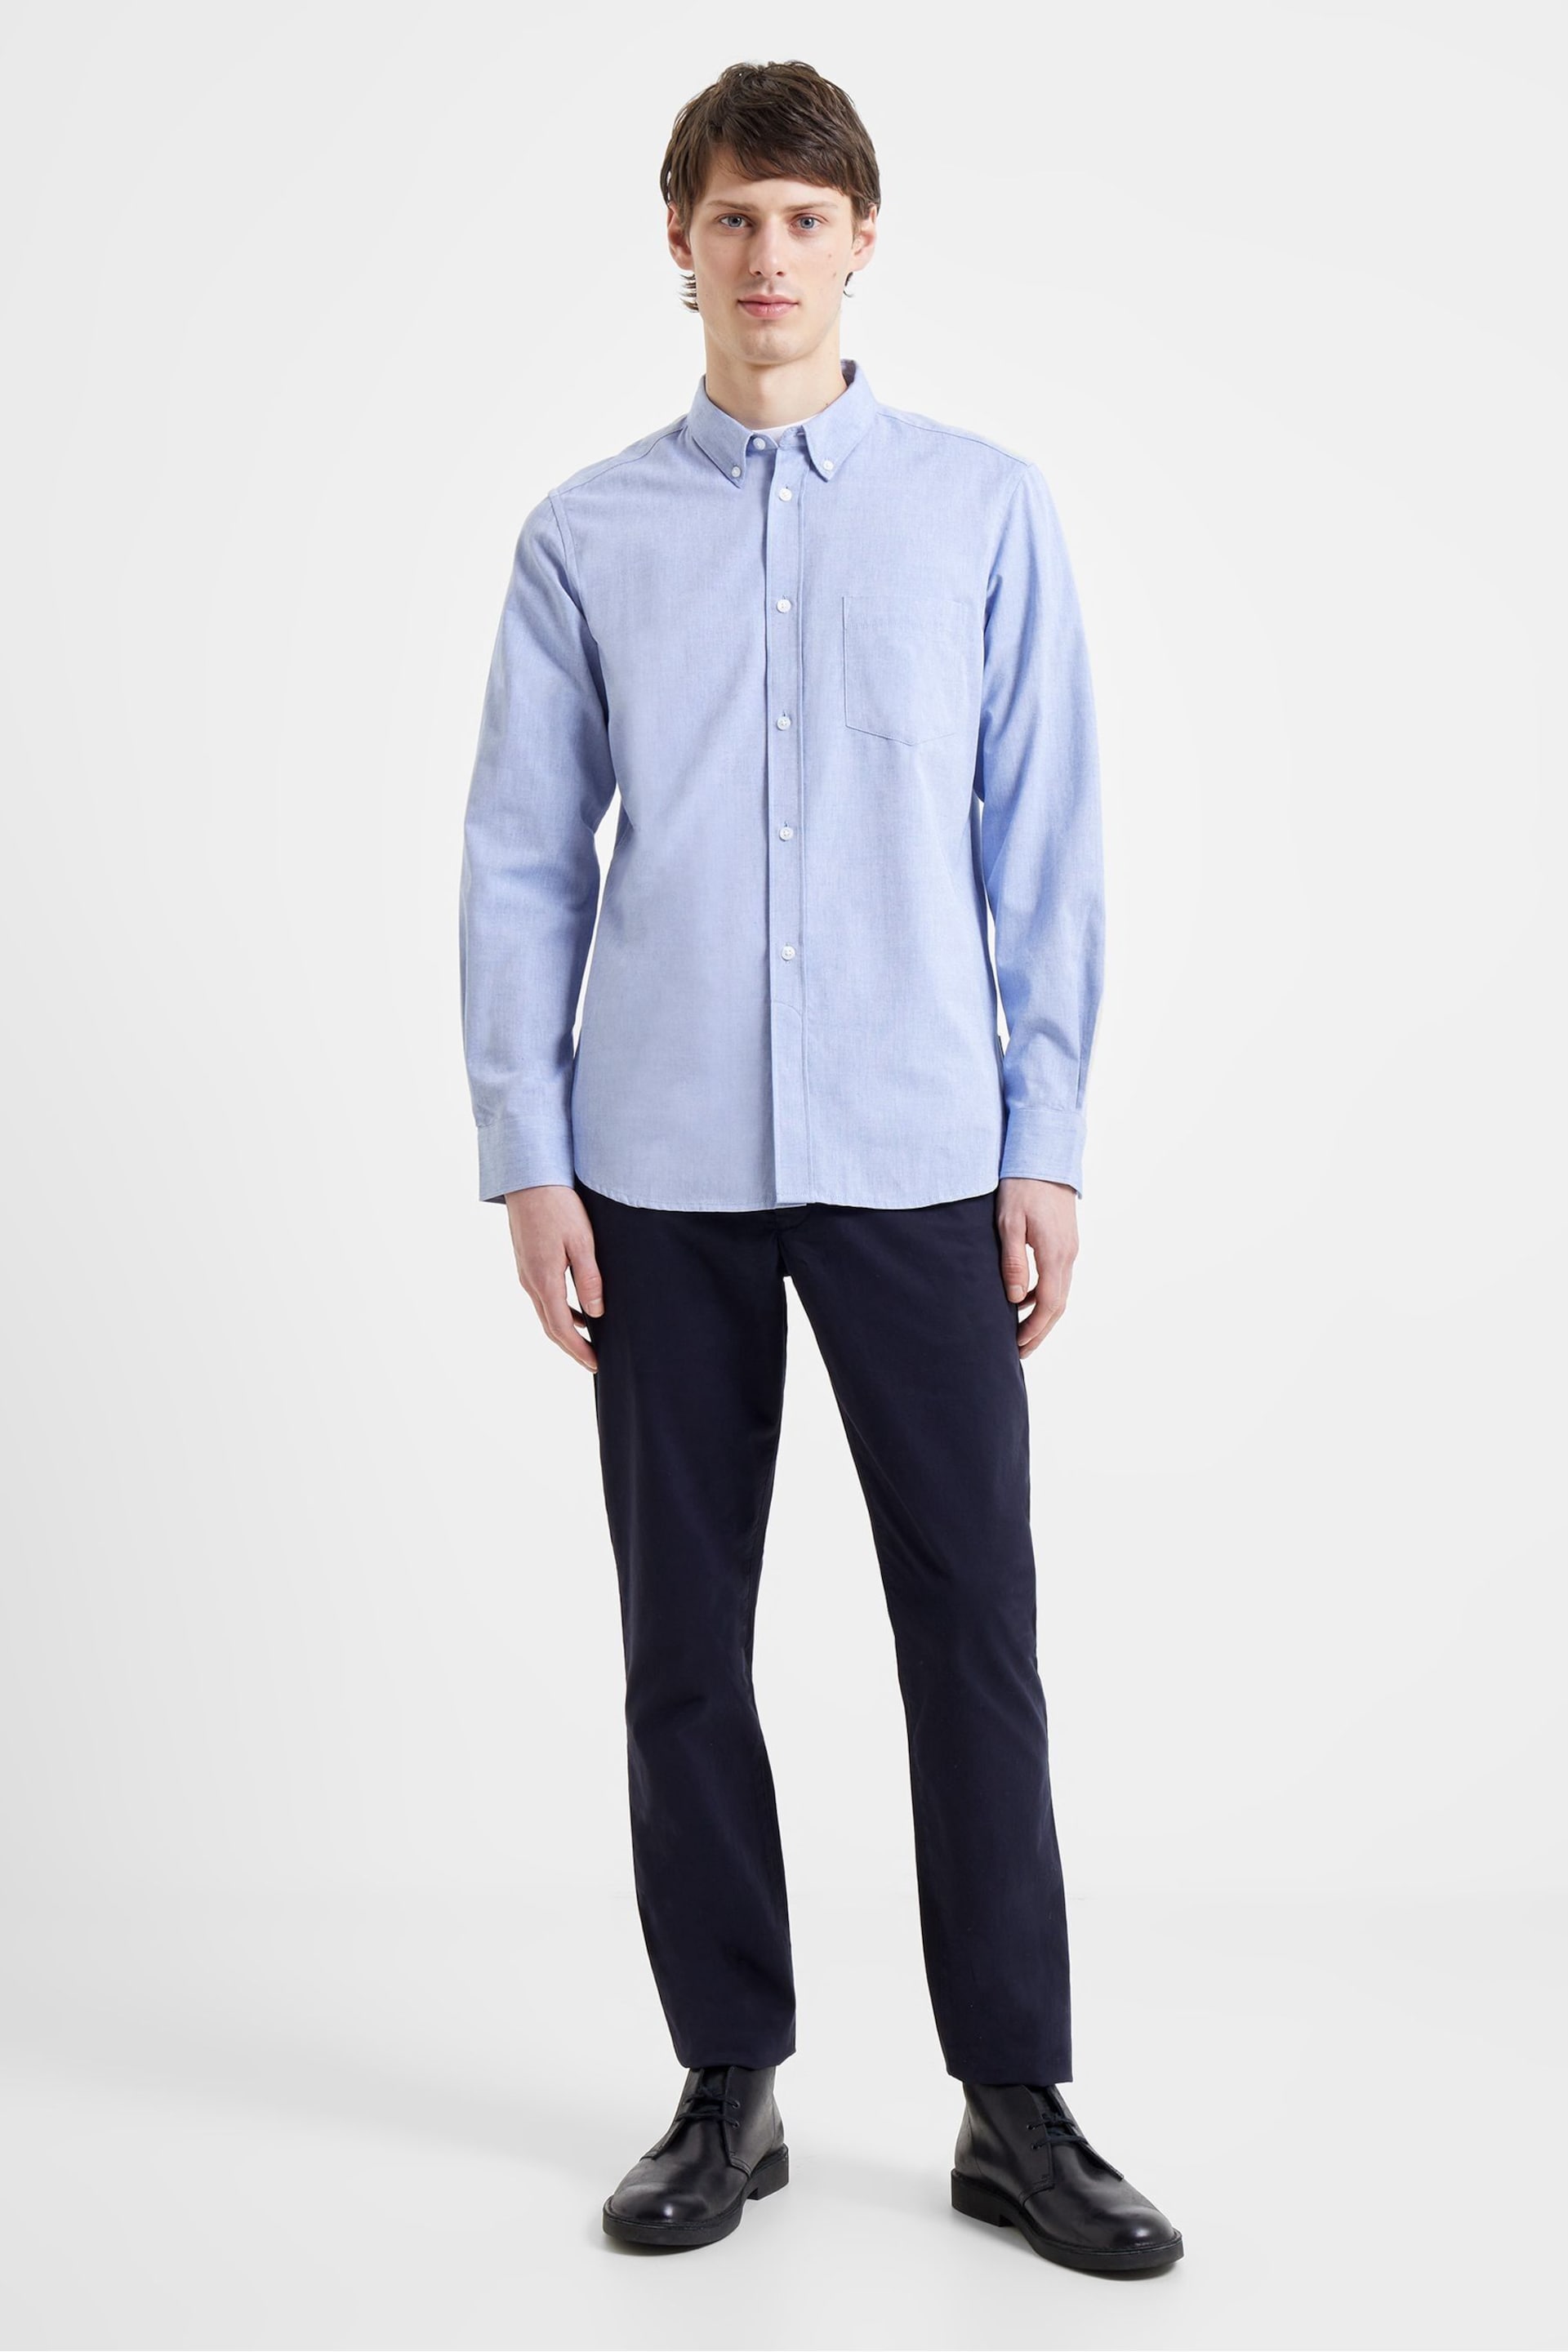 French Connection Blue Oxford Long Sleeve Shirt - Image 5 of 7